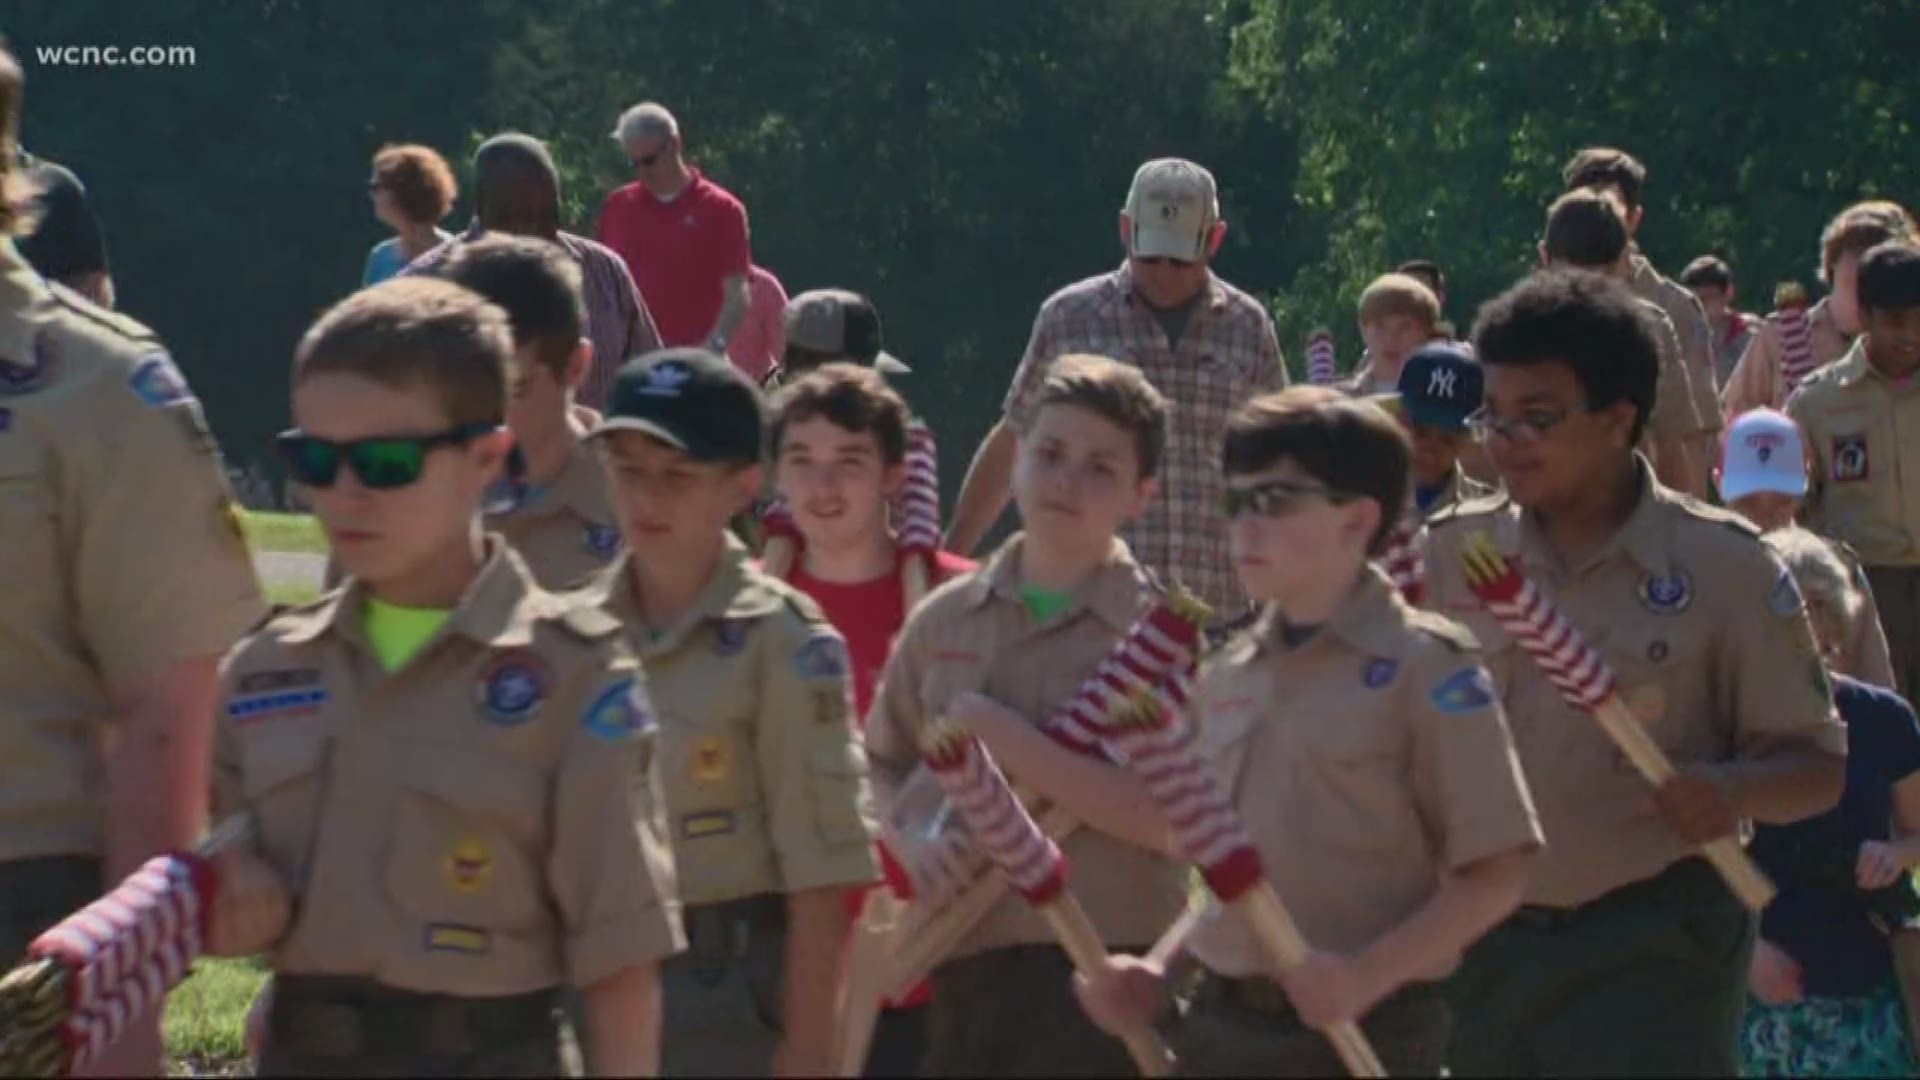 Boy Scouts joined the City Council in Charlotte Saturday to remind others of the meaning of Memorial Day. The group took part in a remembrance ceremony at a cemetery.